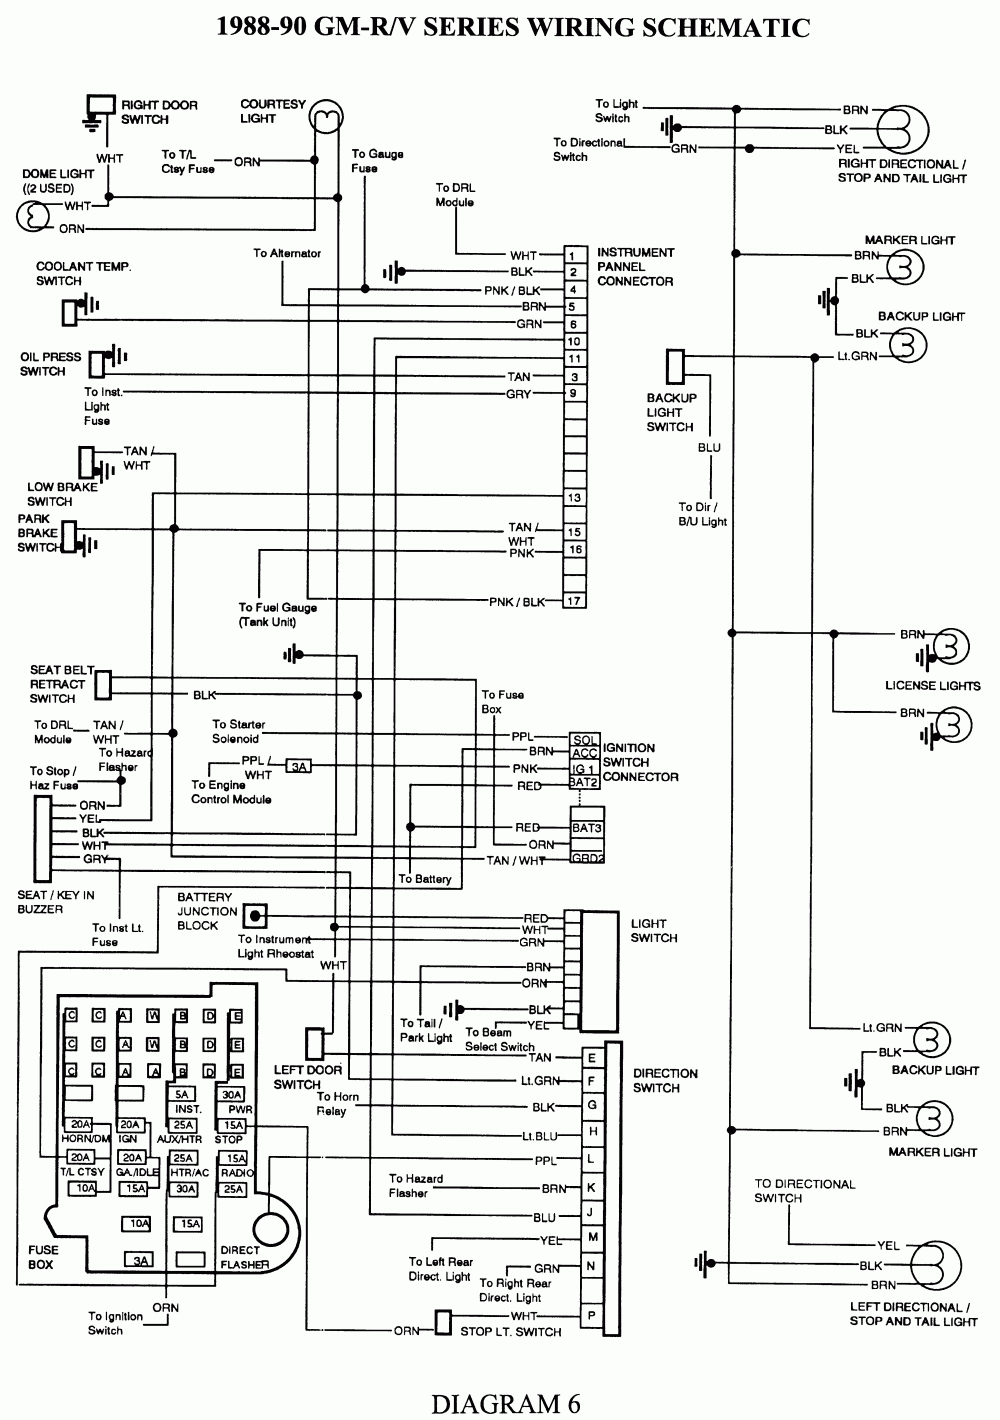 1970 Gm Steering Column Wiring Diagram from 2020cadillac.com